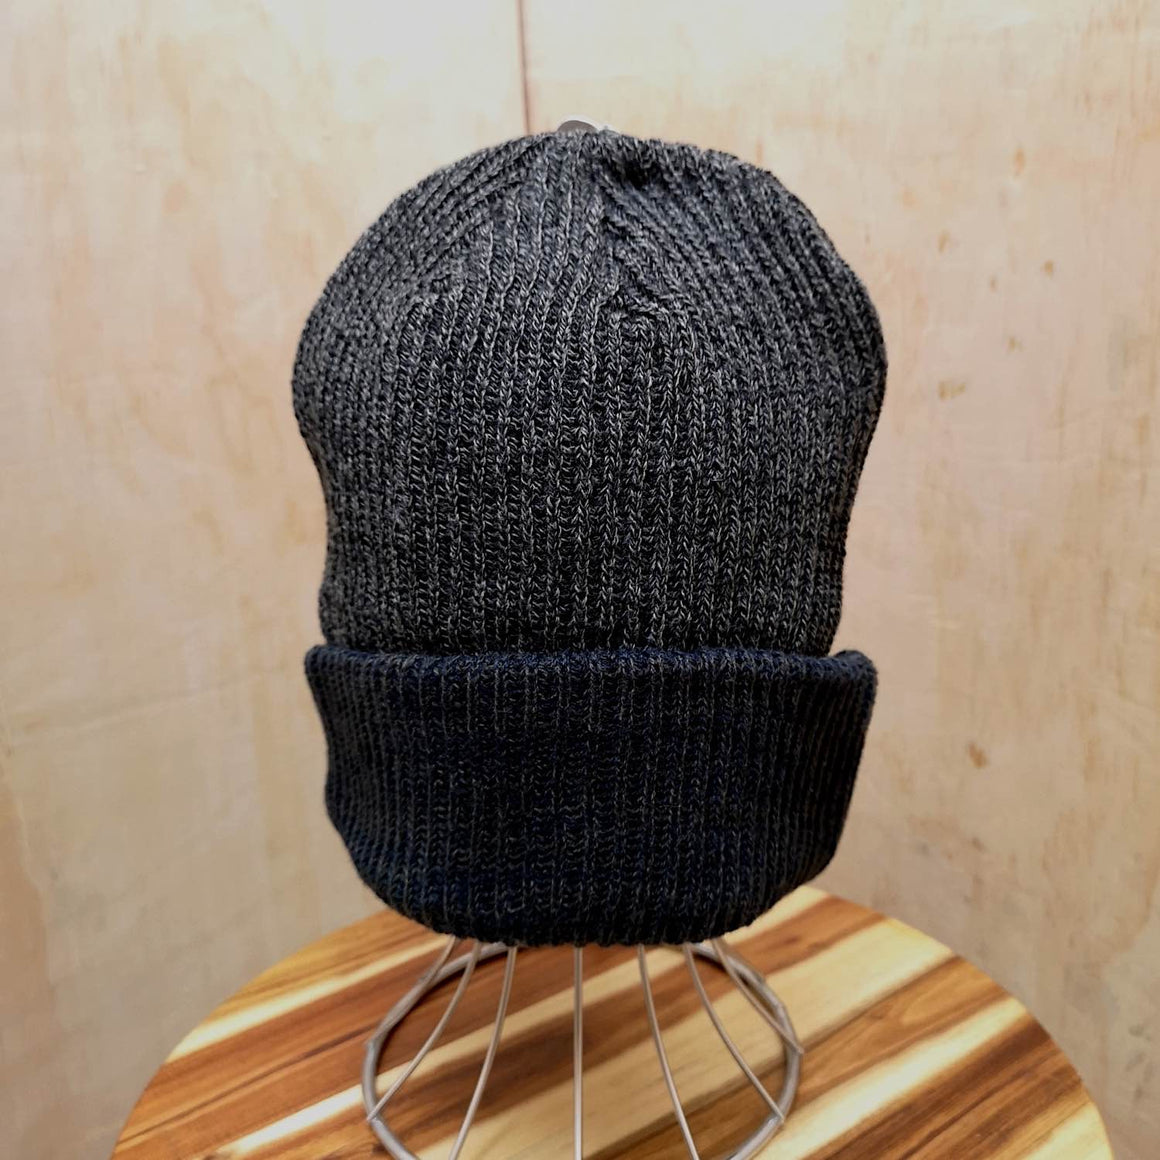 Avenel Rib Knit Beanie with Contrast Cuff Charcoal/Navy